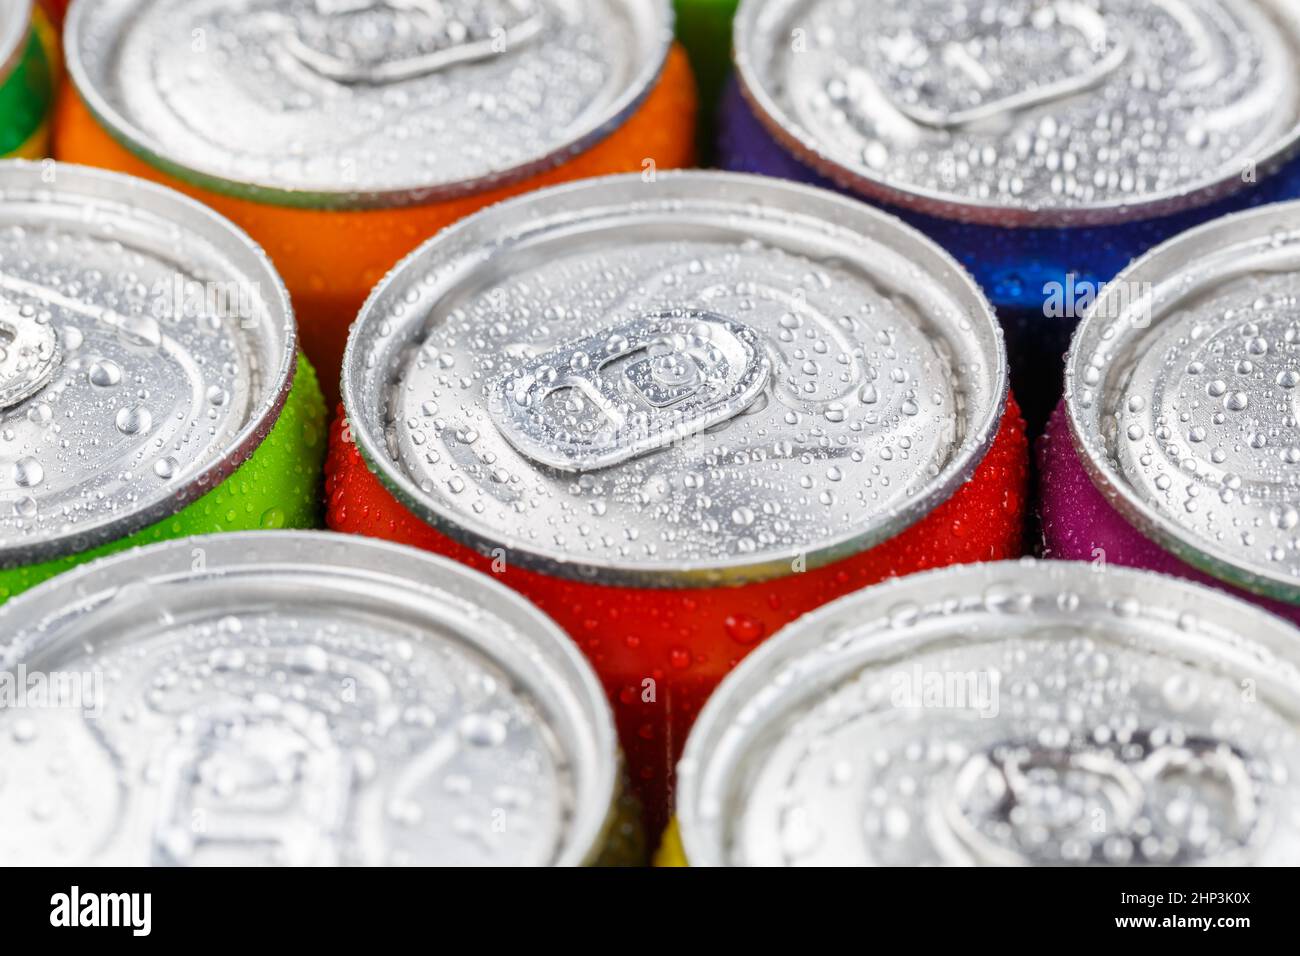 Drinks lemonade cola drink softdrinks in cans can Stock Photo